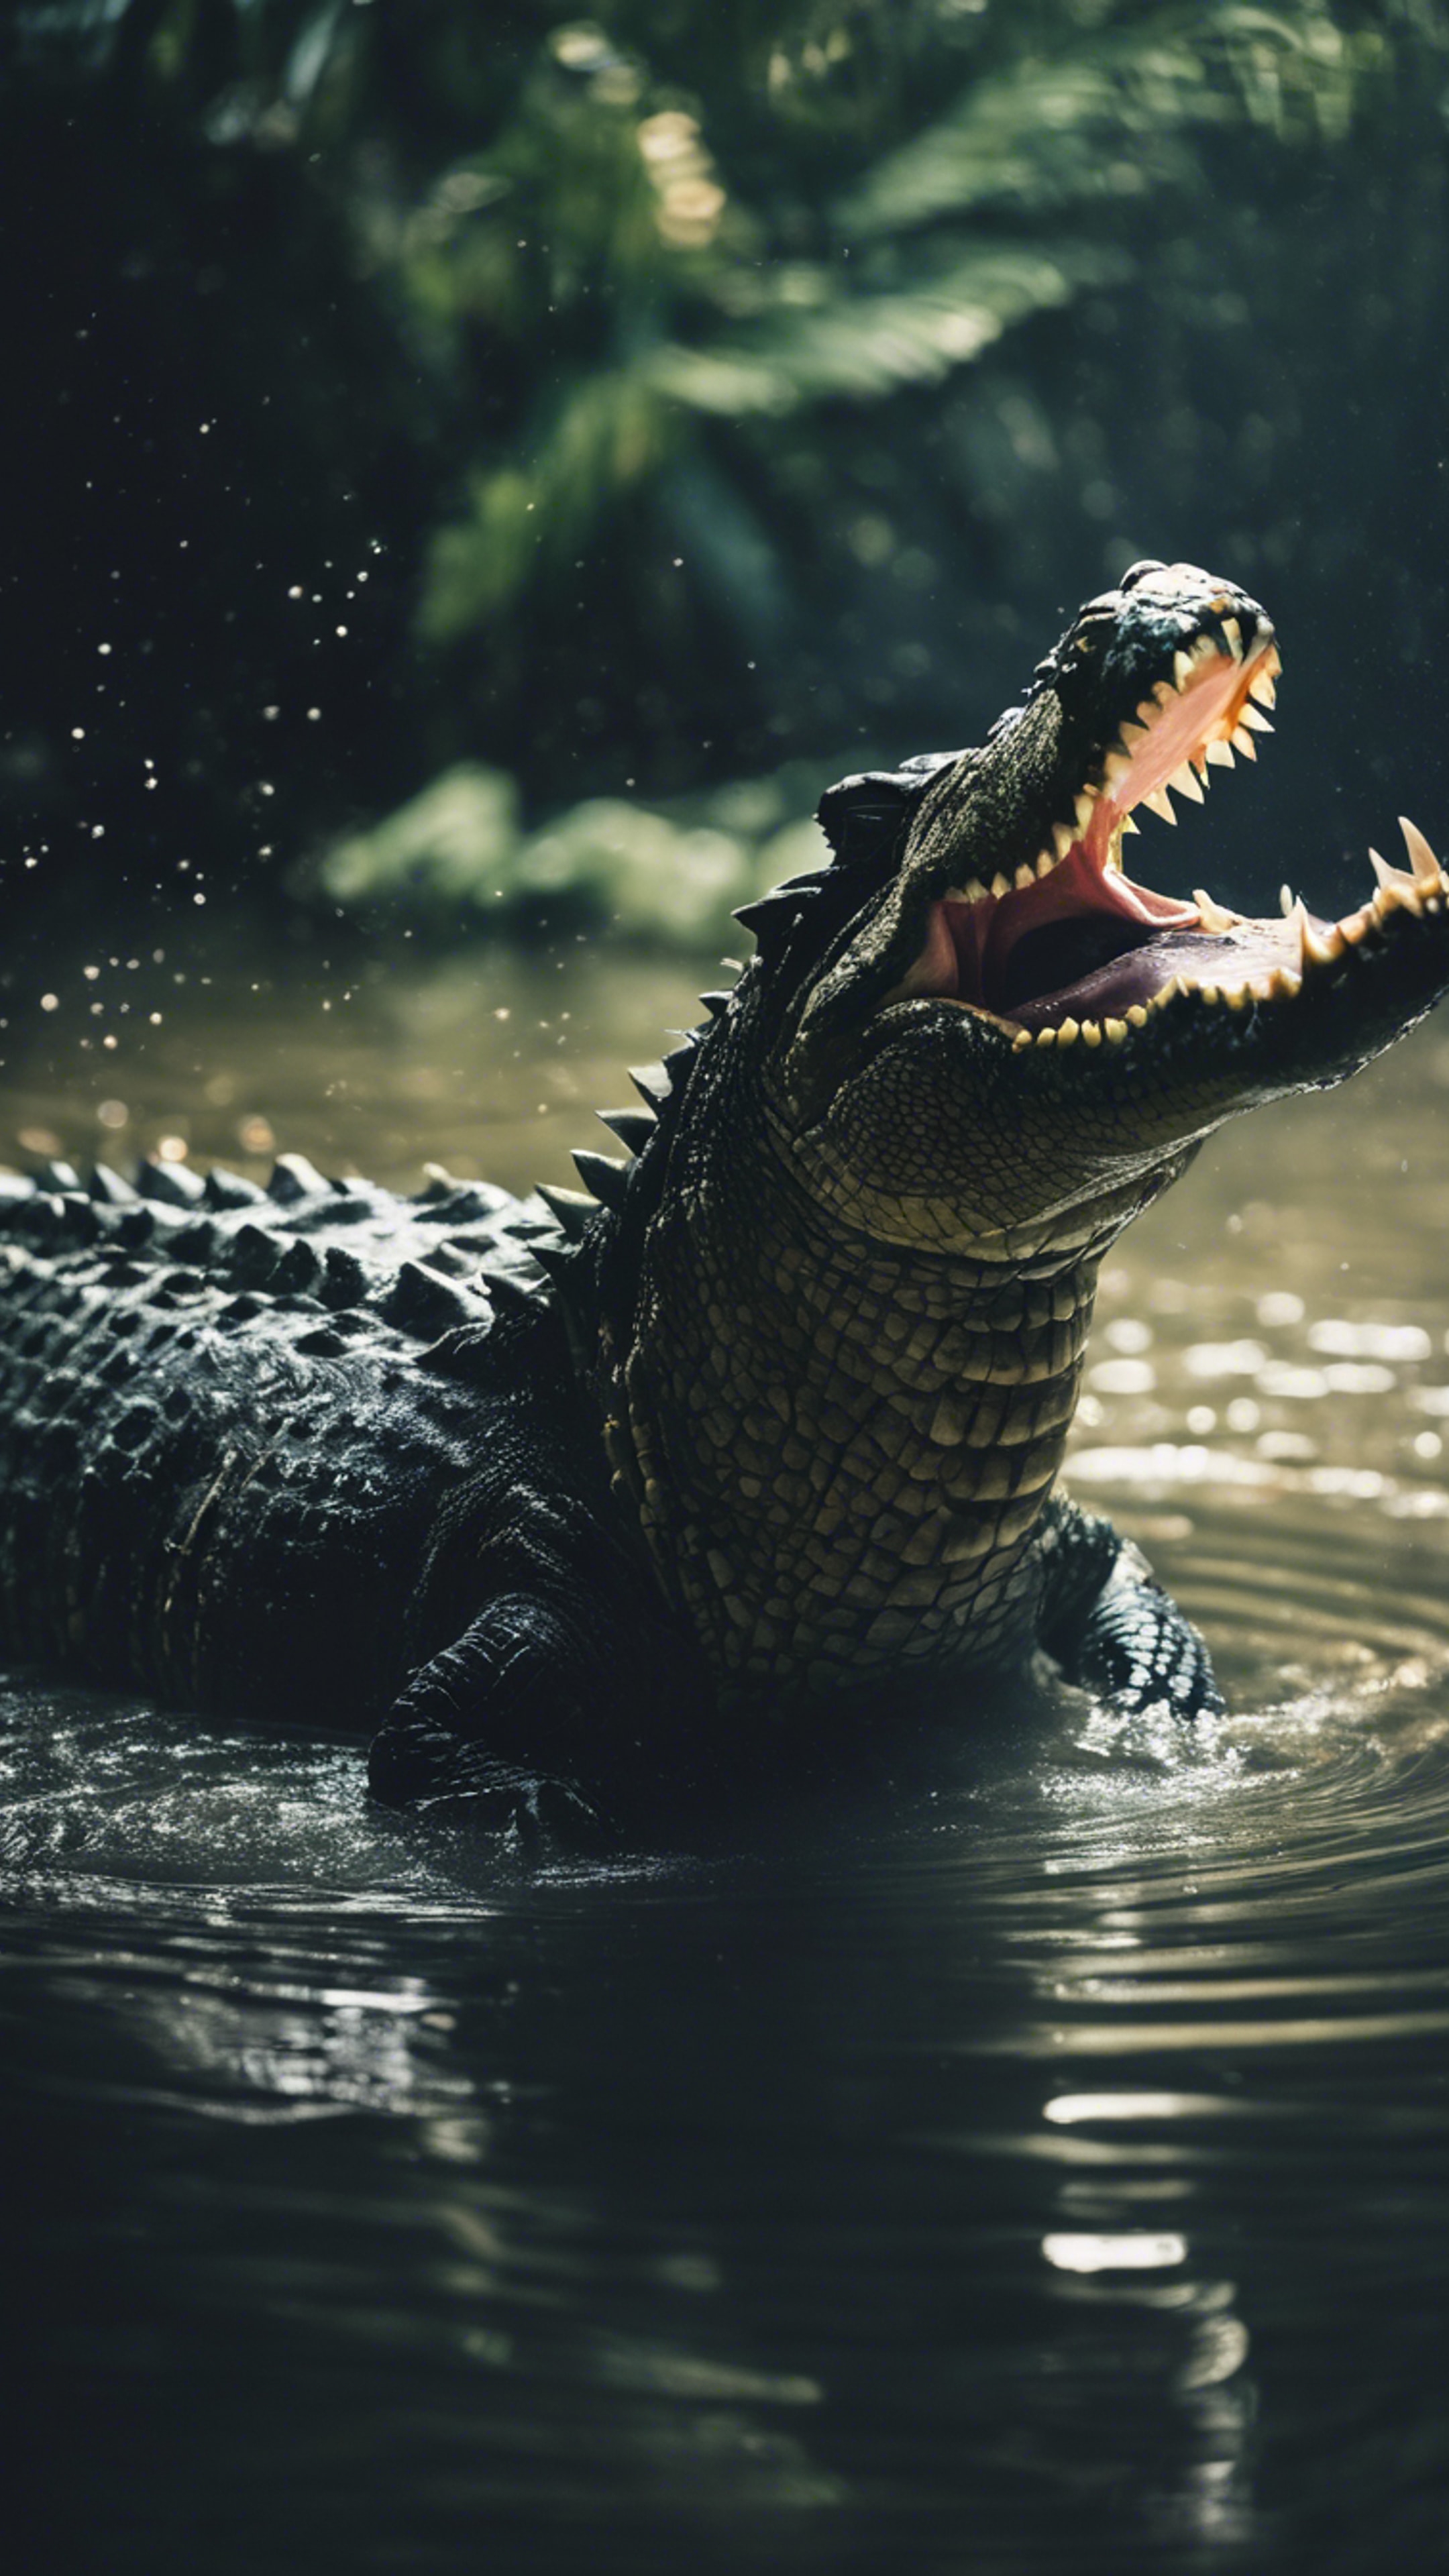 Two crocodiles engaging in a territorial battle in the middle of a dark lagoon.壁紙[ccc66b55c2b3408d8928]